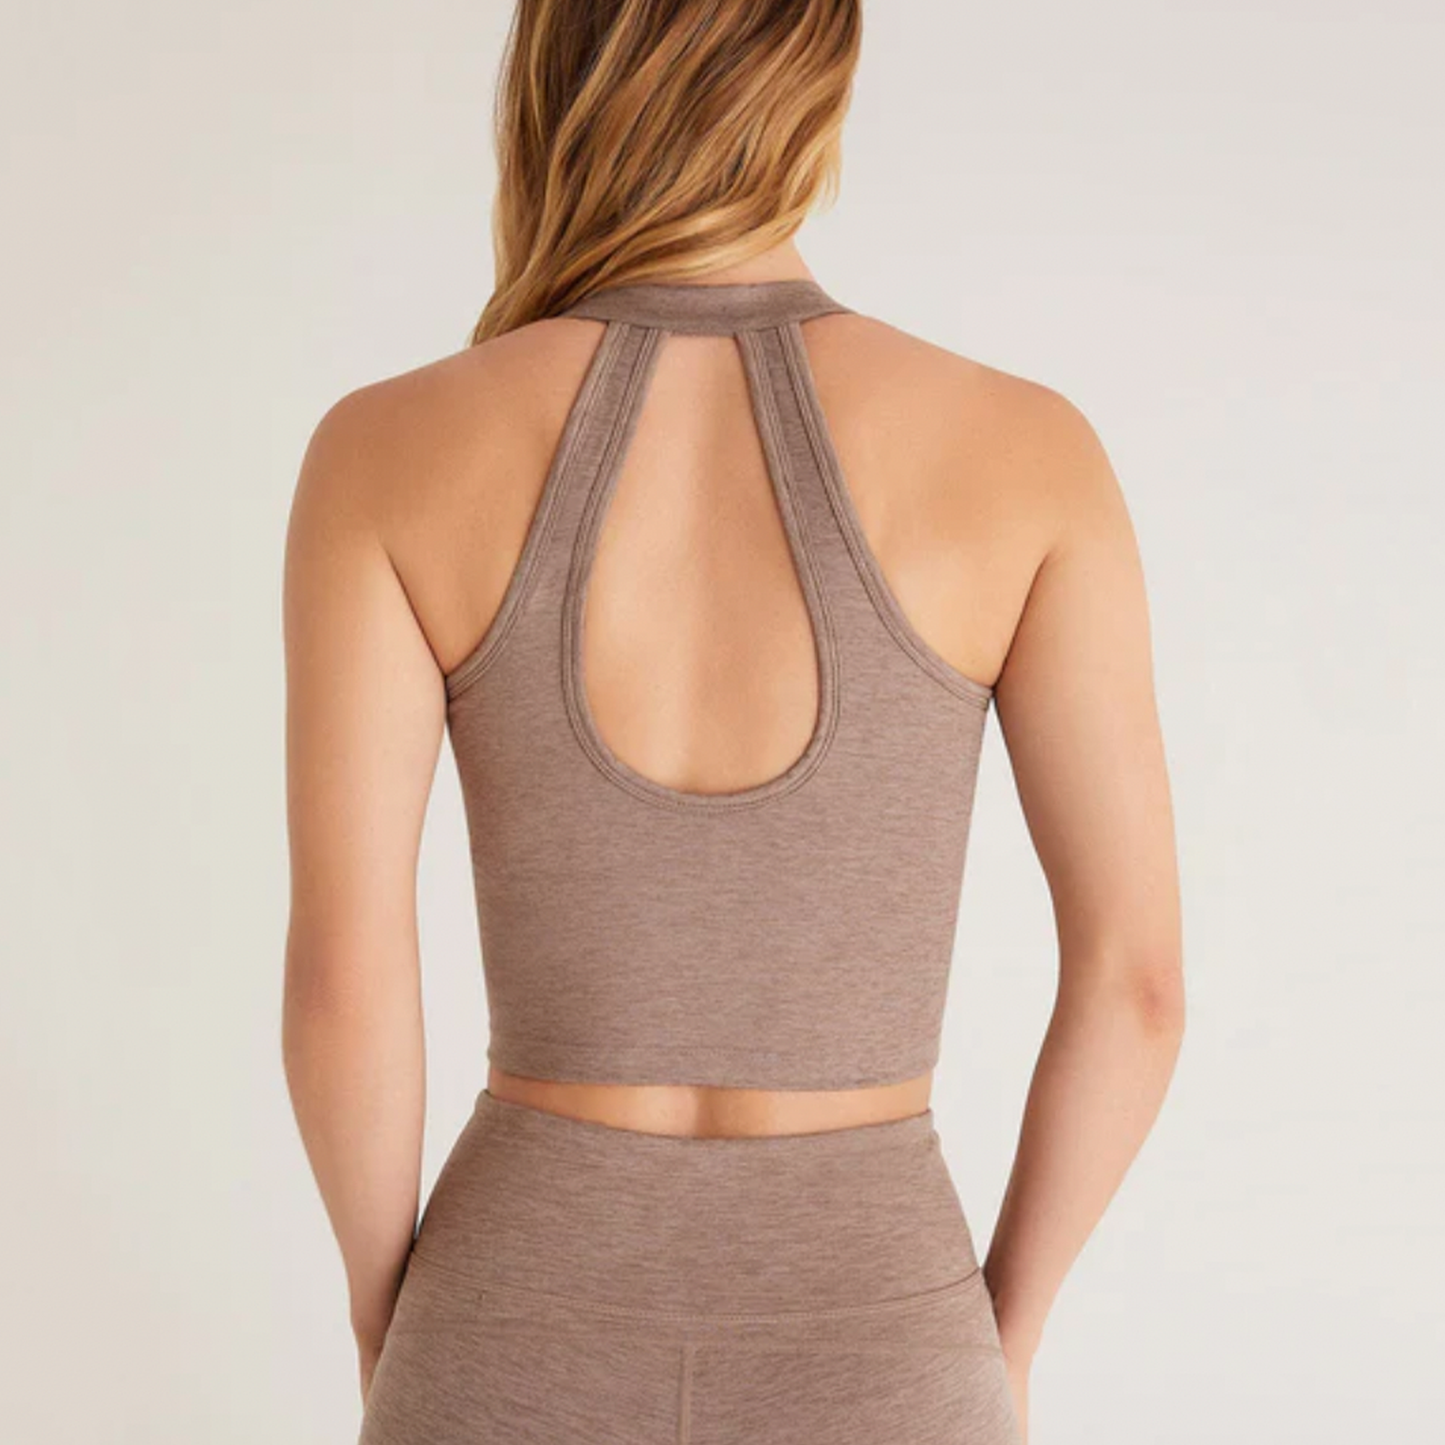 Z Supply Downward Crop Tank. Ultra comfy yet chic, the Downward Sports Bra is made in a soft, moisture-wicking, Simply Brushed polyester spandex fabric. This cropped tank sports bra features a shelf bra with removable pads and a flattering scoop back detail that sets it apart from other sports bras